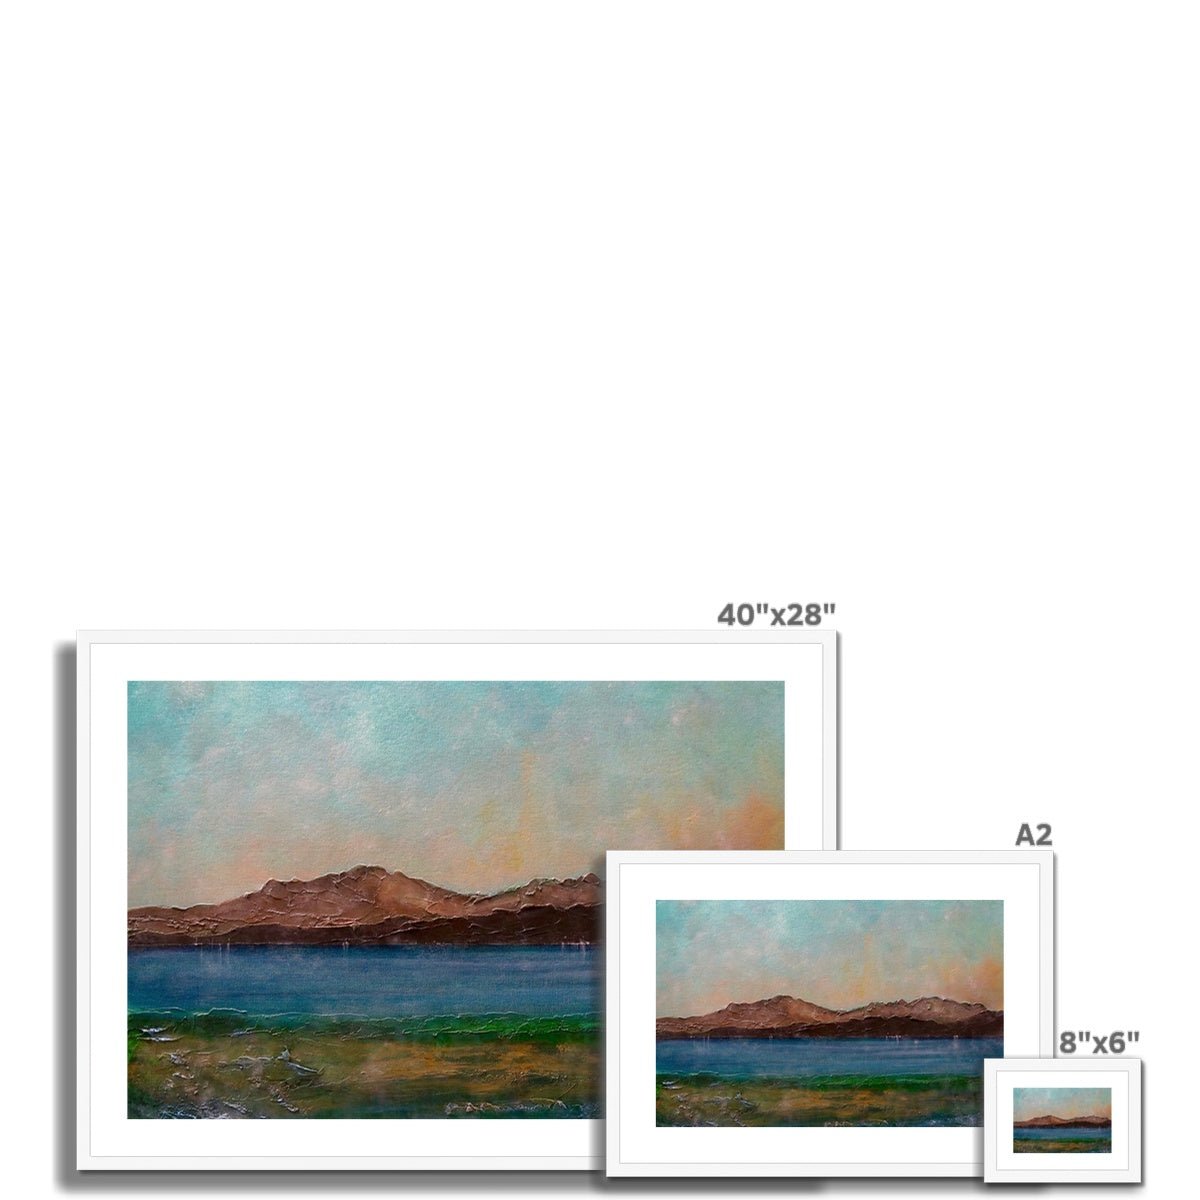 Arran From Scalpsie Bay Painting | Framed & Mounted Prints From Scotland-Framed & Mounted Prints-Arran Art Gallery-Paintings, Prints, Homeware, Art Gifts From Scotland By Scottish Artist Kevin Hunter